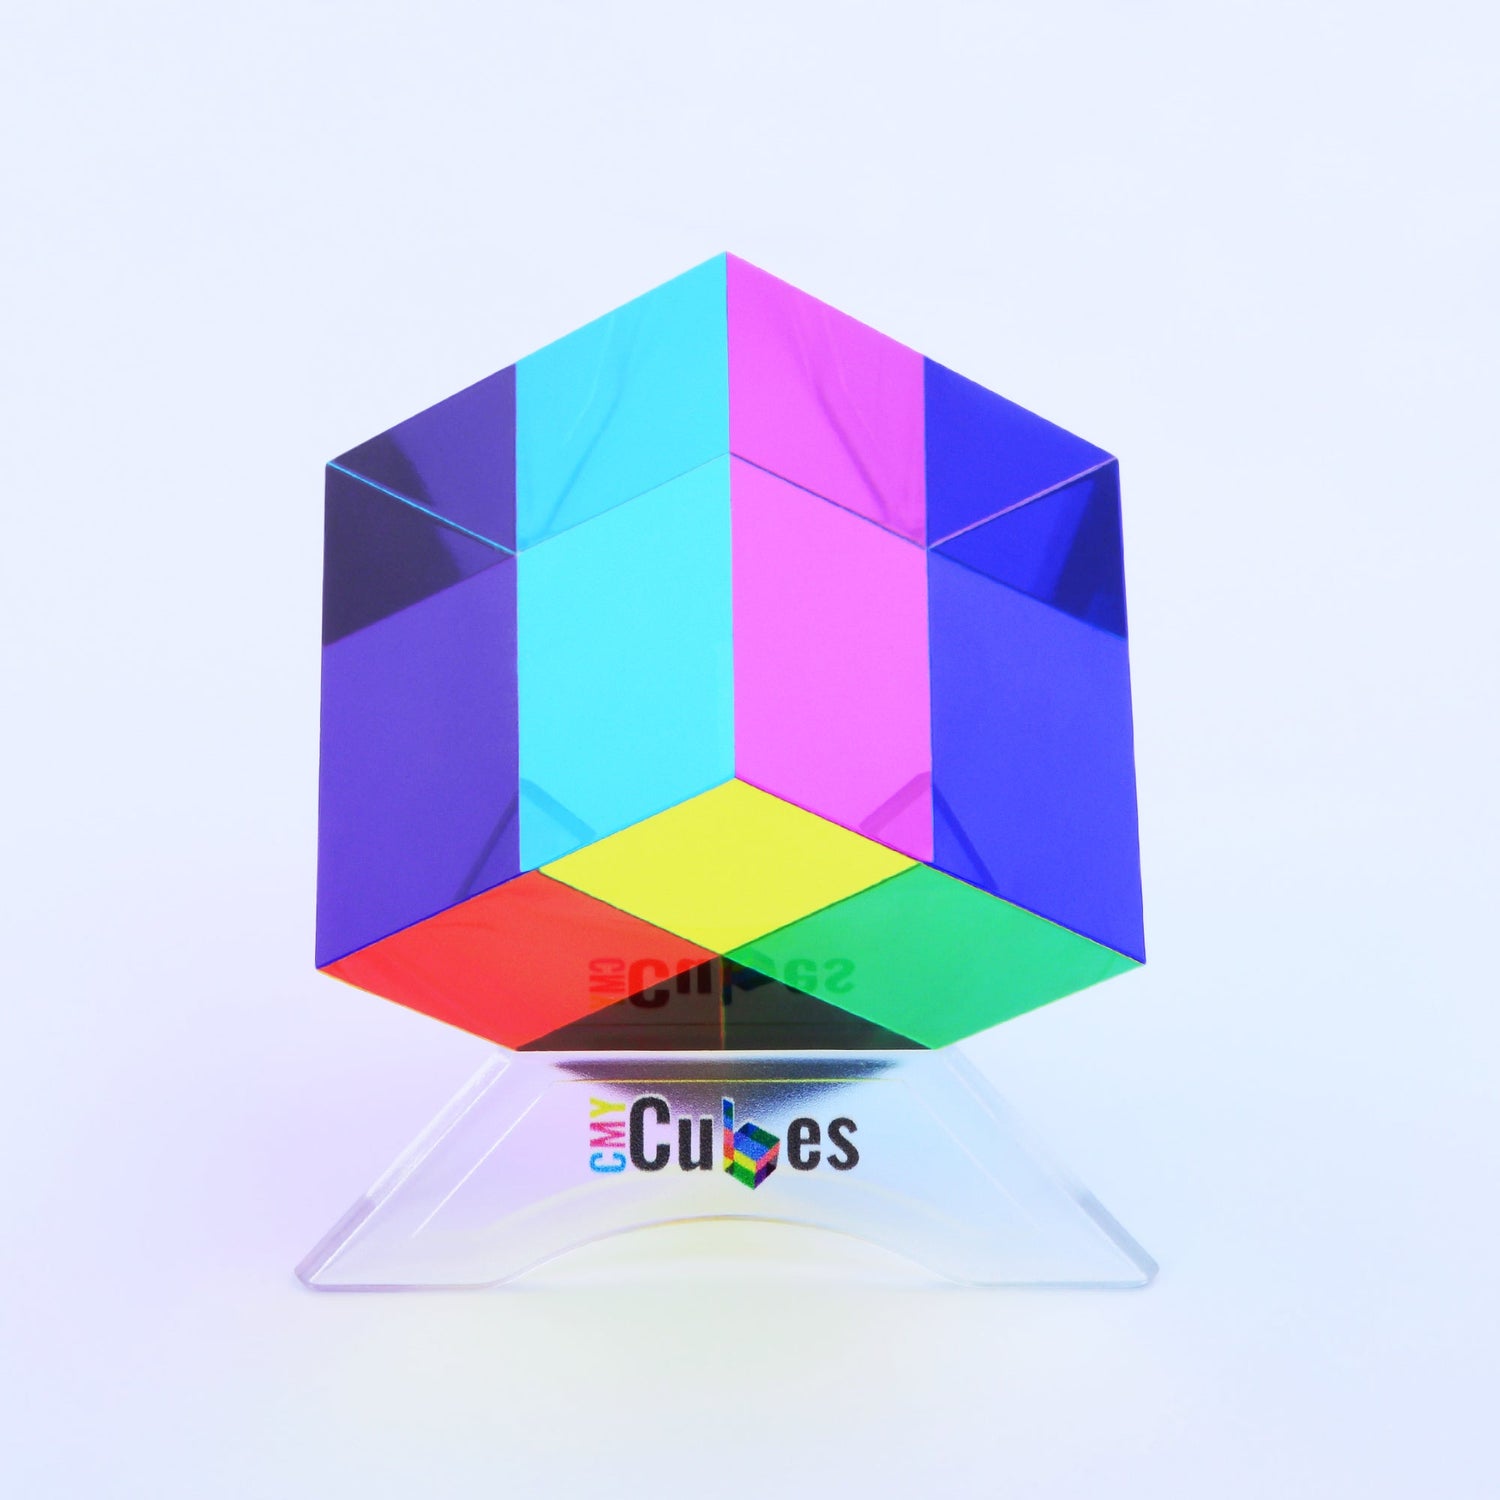 A brightly colored rubix cube-type fidget toy in bright primary colors sits on a stand